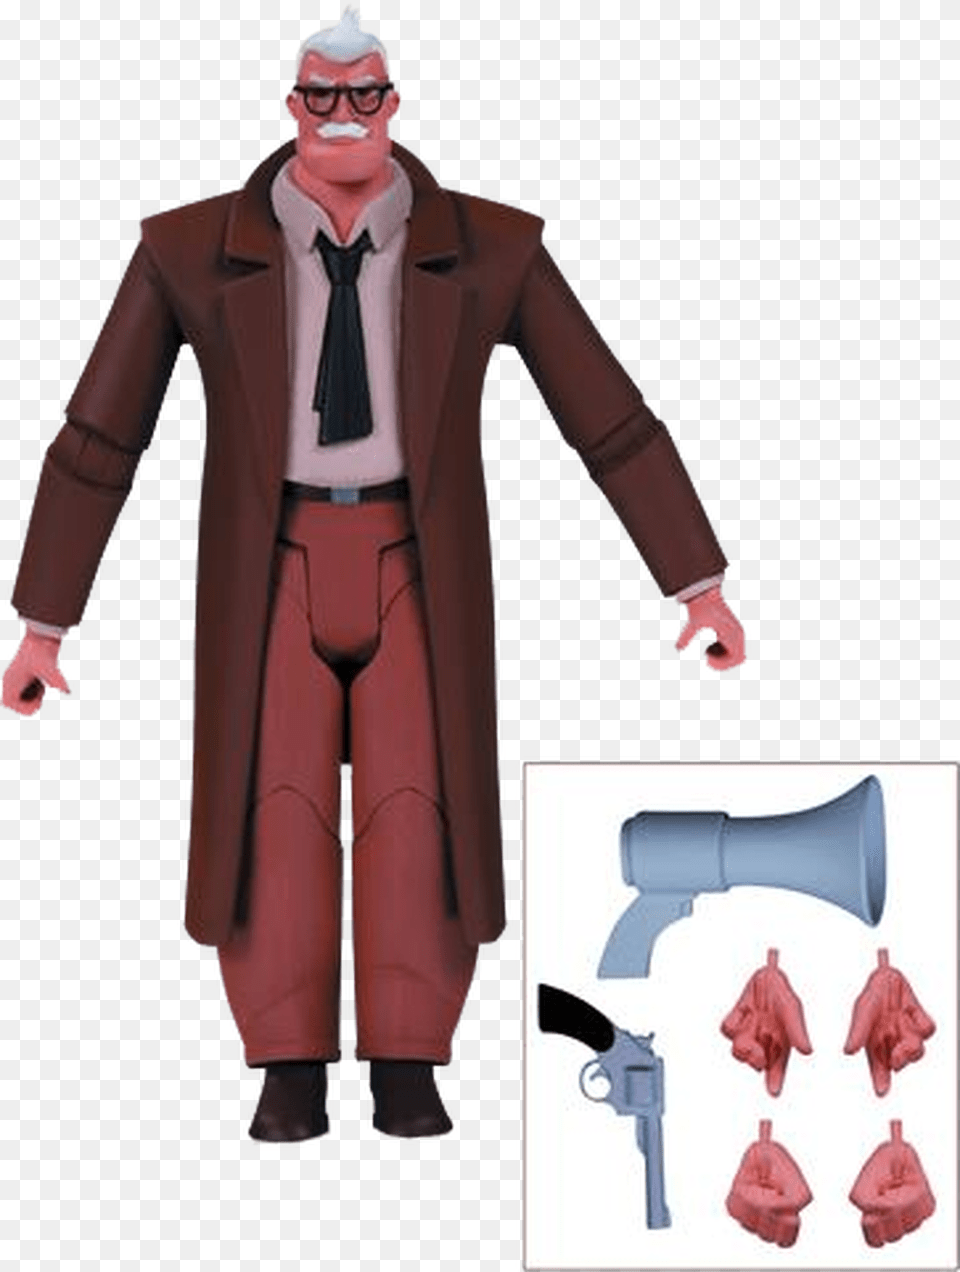 The Animated Series Batman Animated Series Figure Commissioner Gordon, Clothing, Coat, Formal Wear, Suit Png Image